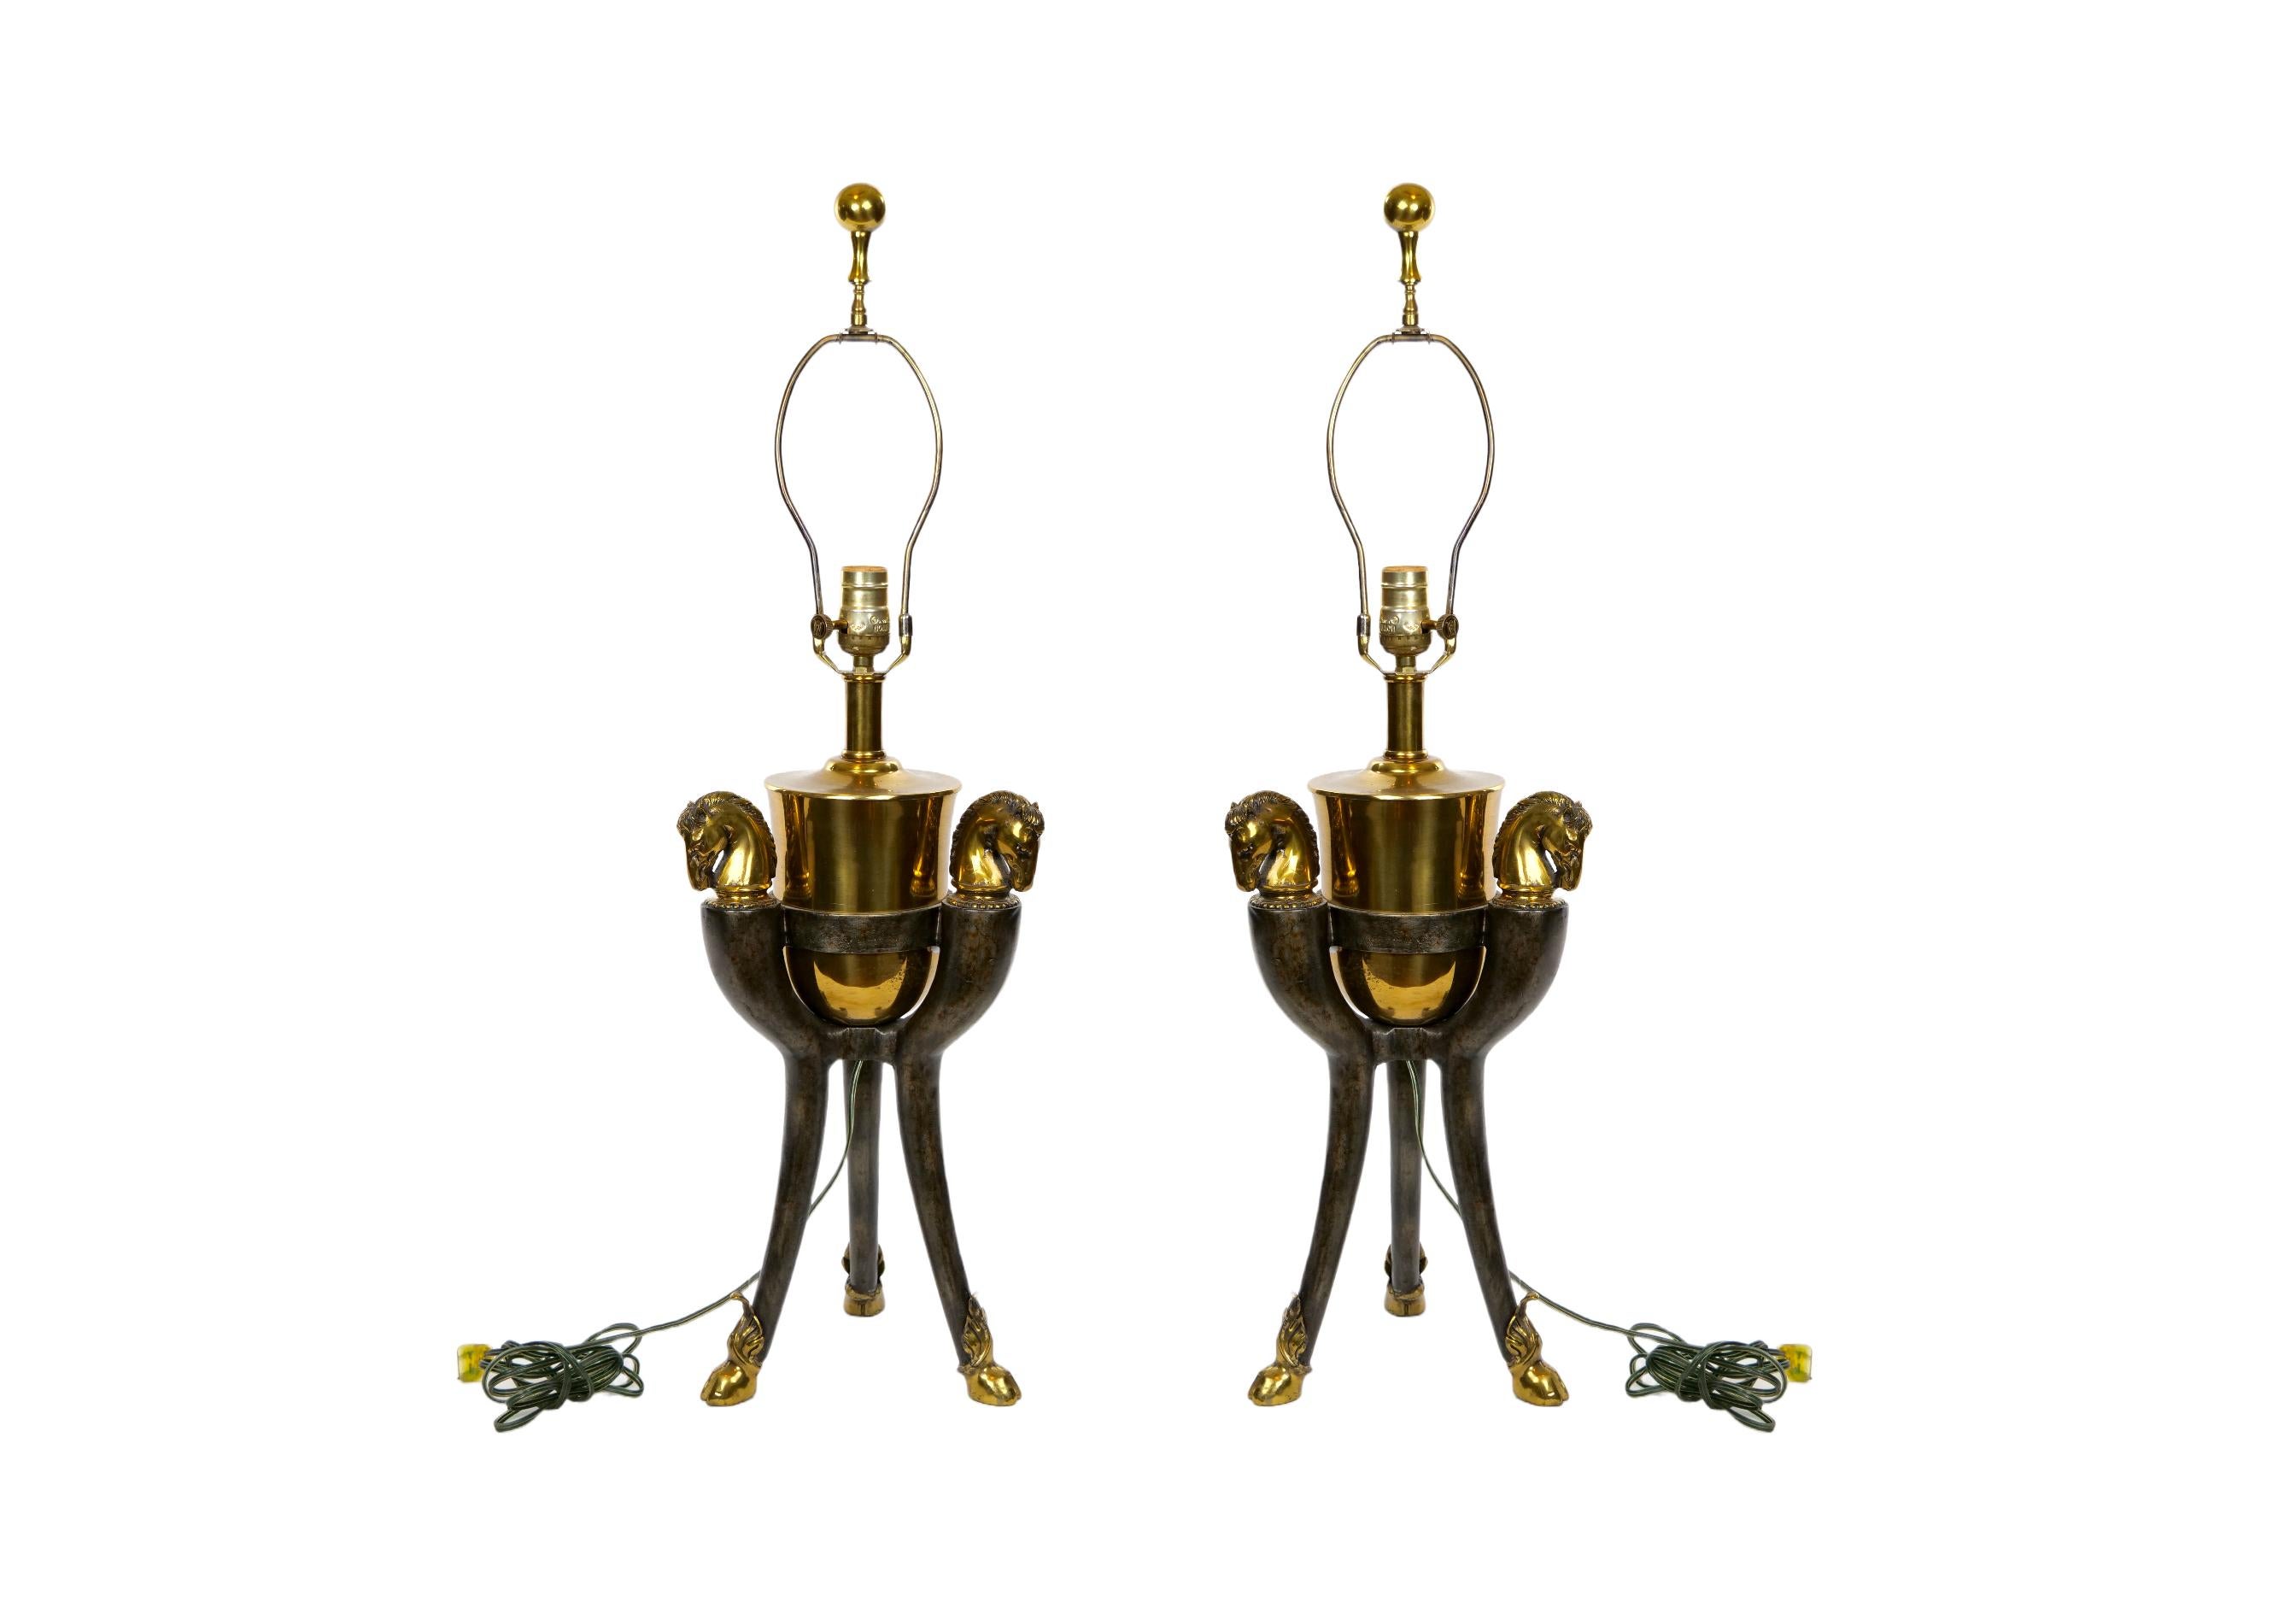 Late 20th century bronze and gilt brass  horse head sculpture pair decorative table lamps. Each lamp features a gilt brass top with three horses head details resting on three feet gilt with horse shoes design. Each lamp is in good working condition.